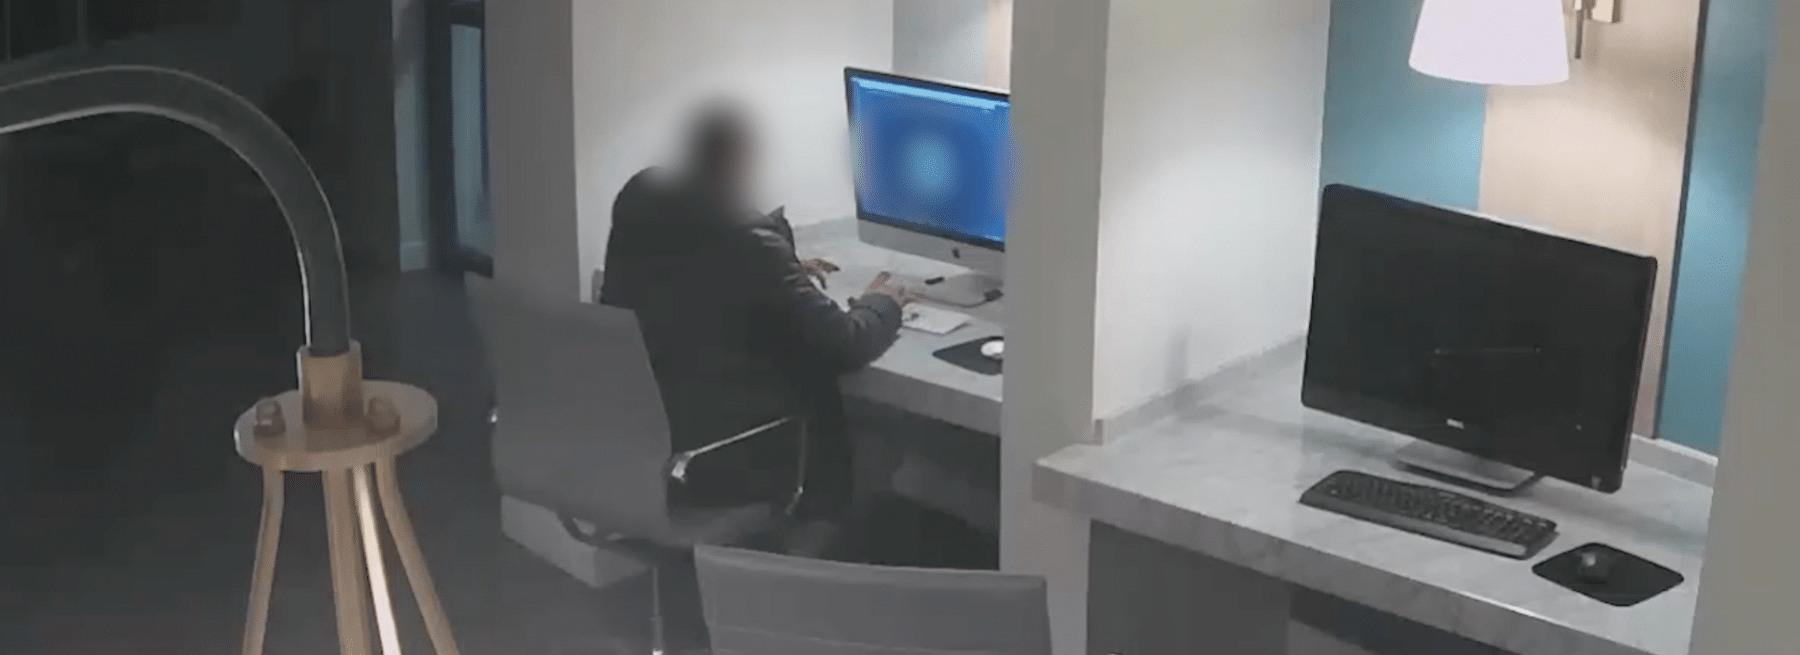 Trespasser breaks in to browse the internet